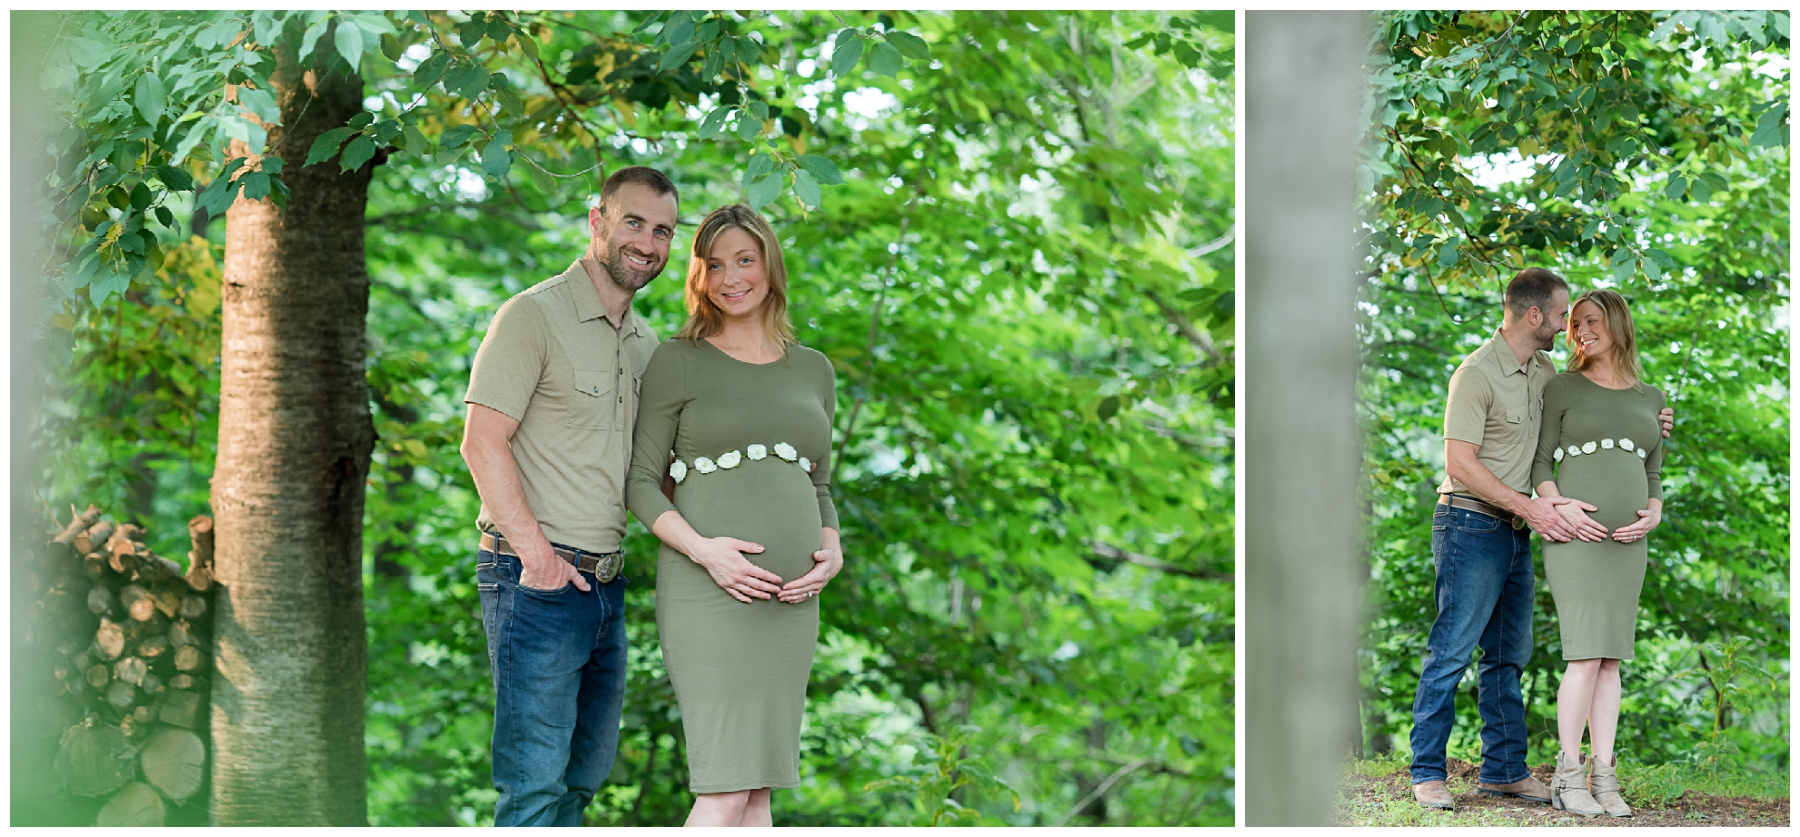 Outdoor Maternity Session Berks County PA_0128.jpg